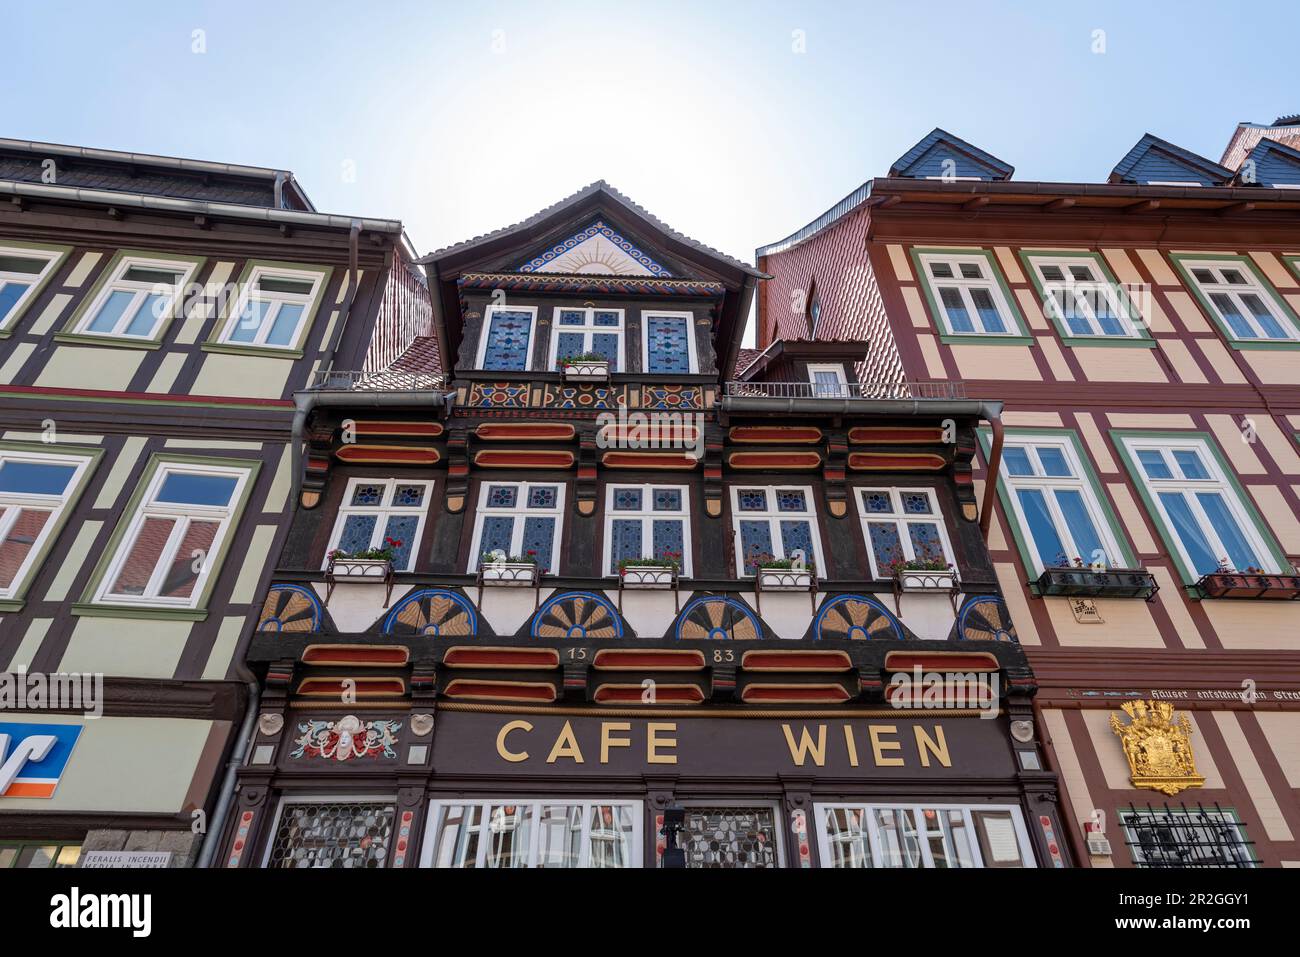 Café Wien, built in 1583, one of the oldest half-timbered houses in Wernigerode, is a listed building, Wernigerode, Saxony-Anhalt, Germany Stock Photo